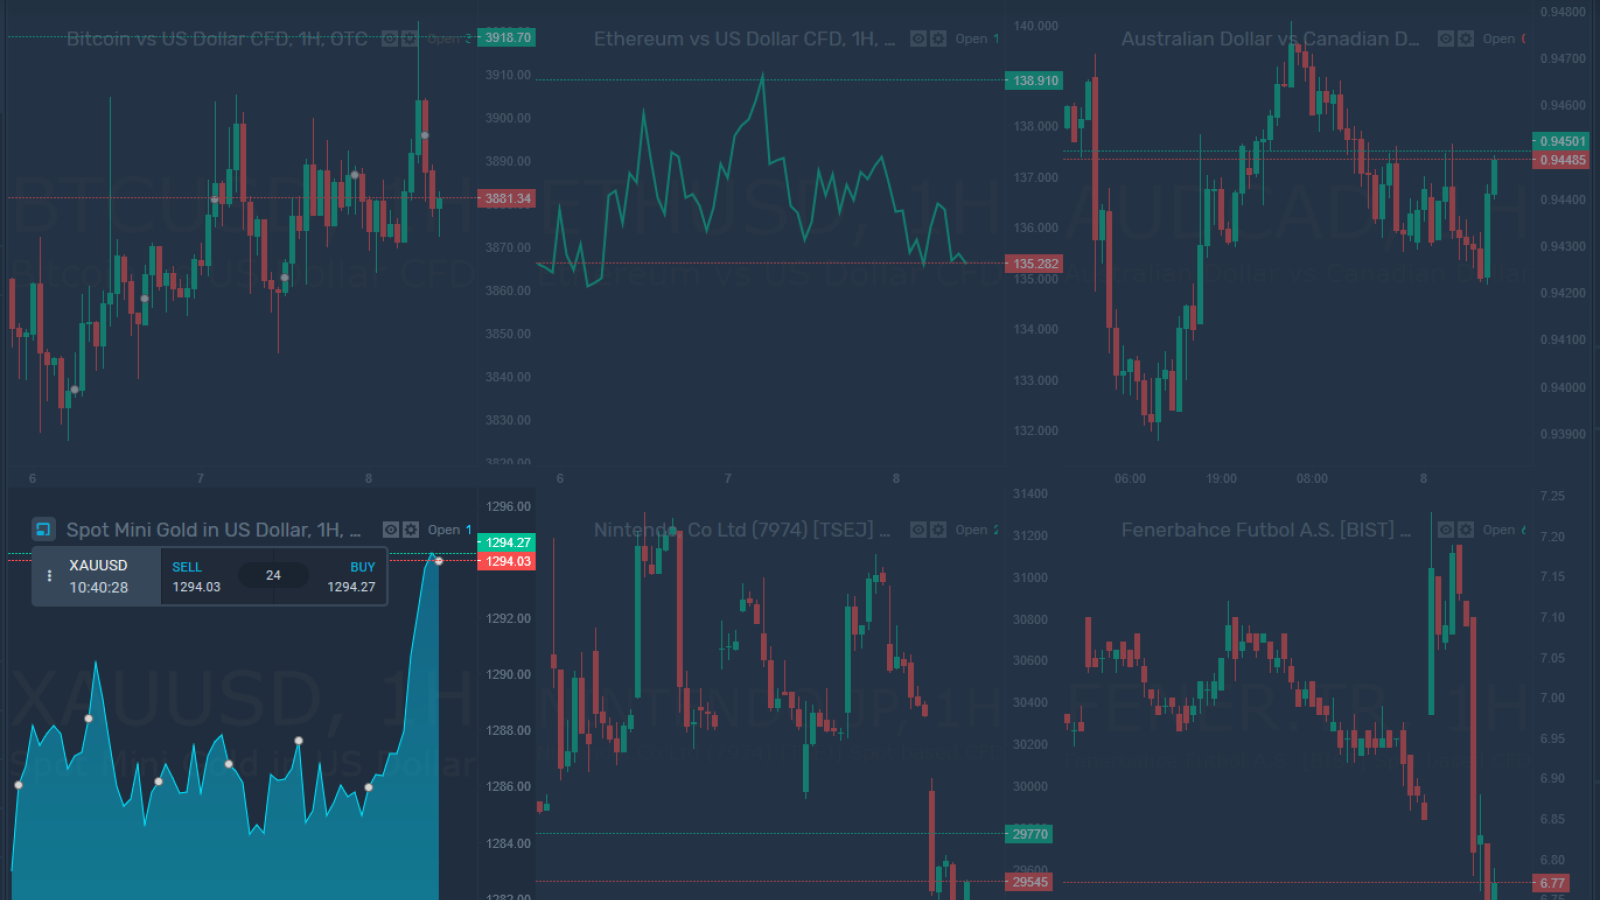 Trading Ideas, Multicharts, and Live Widgets - SimpleFX Promotes New Features With Lower Spreads